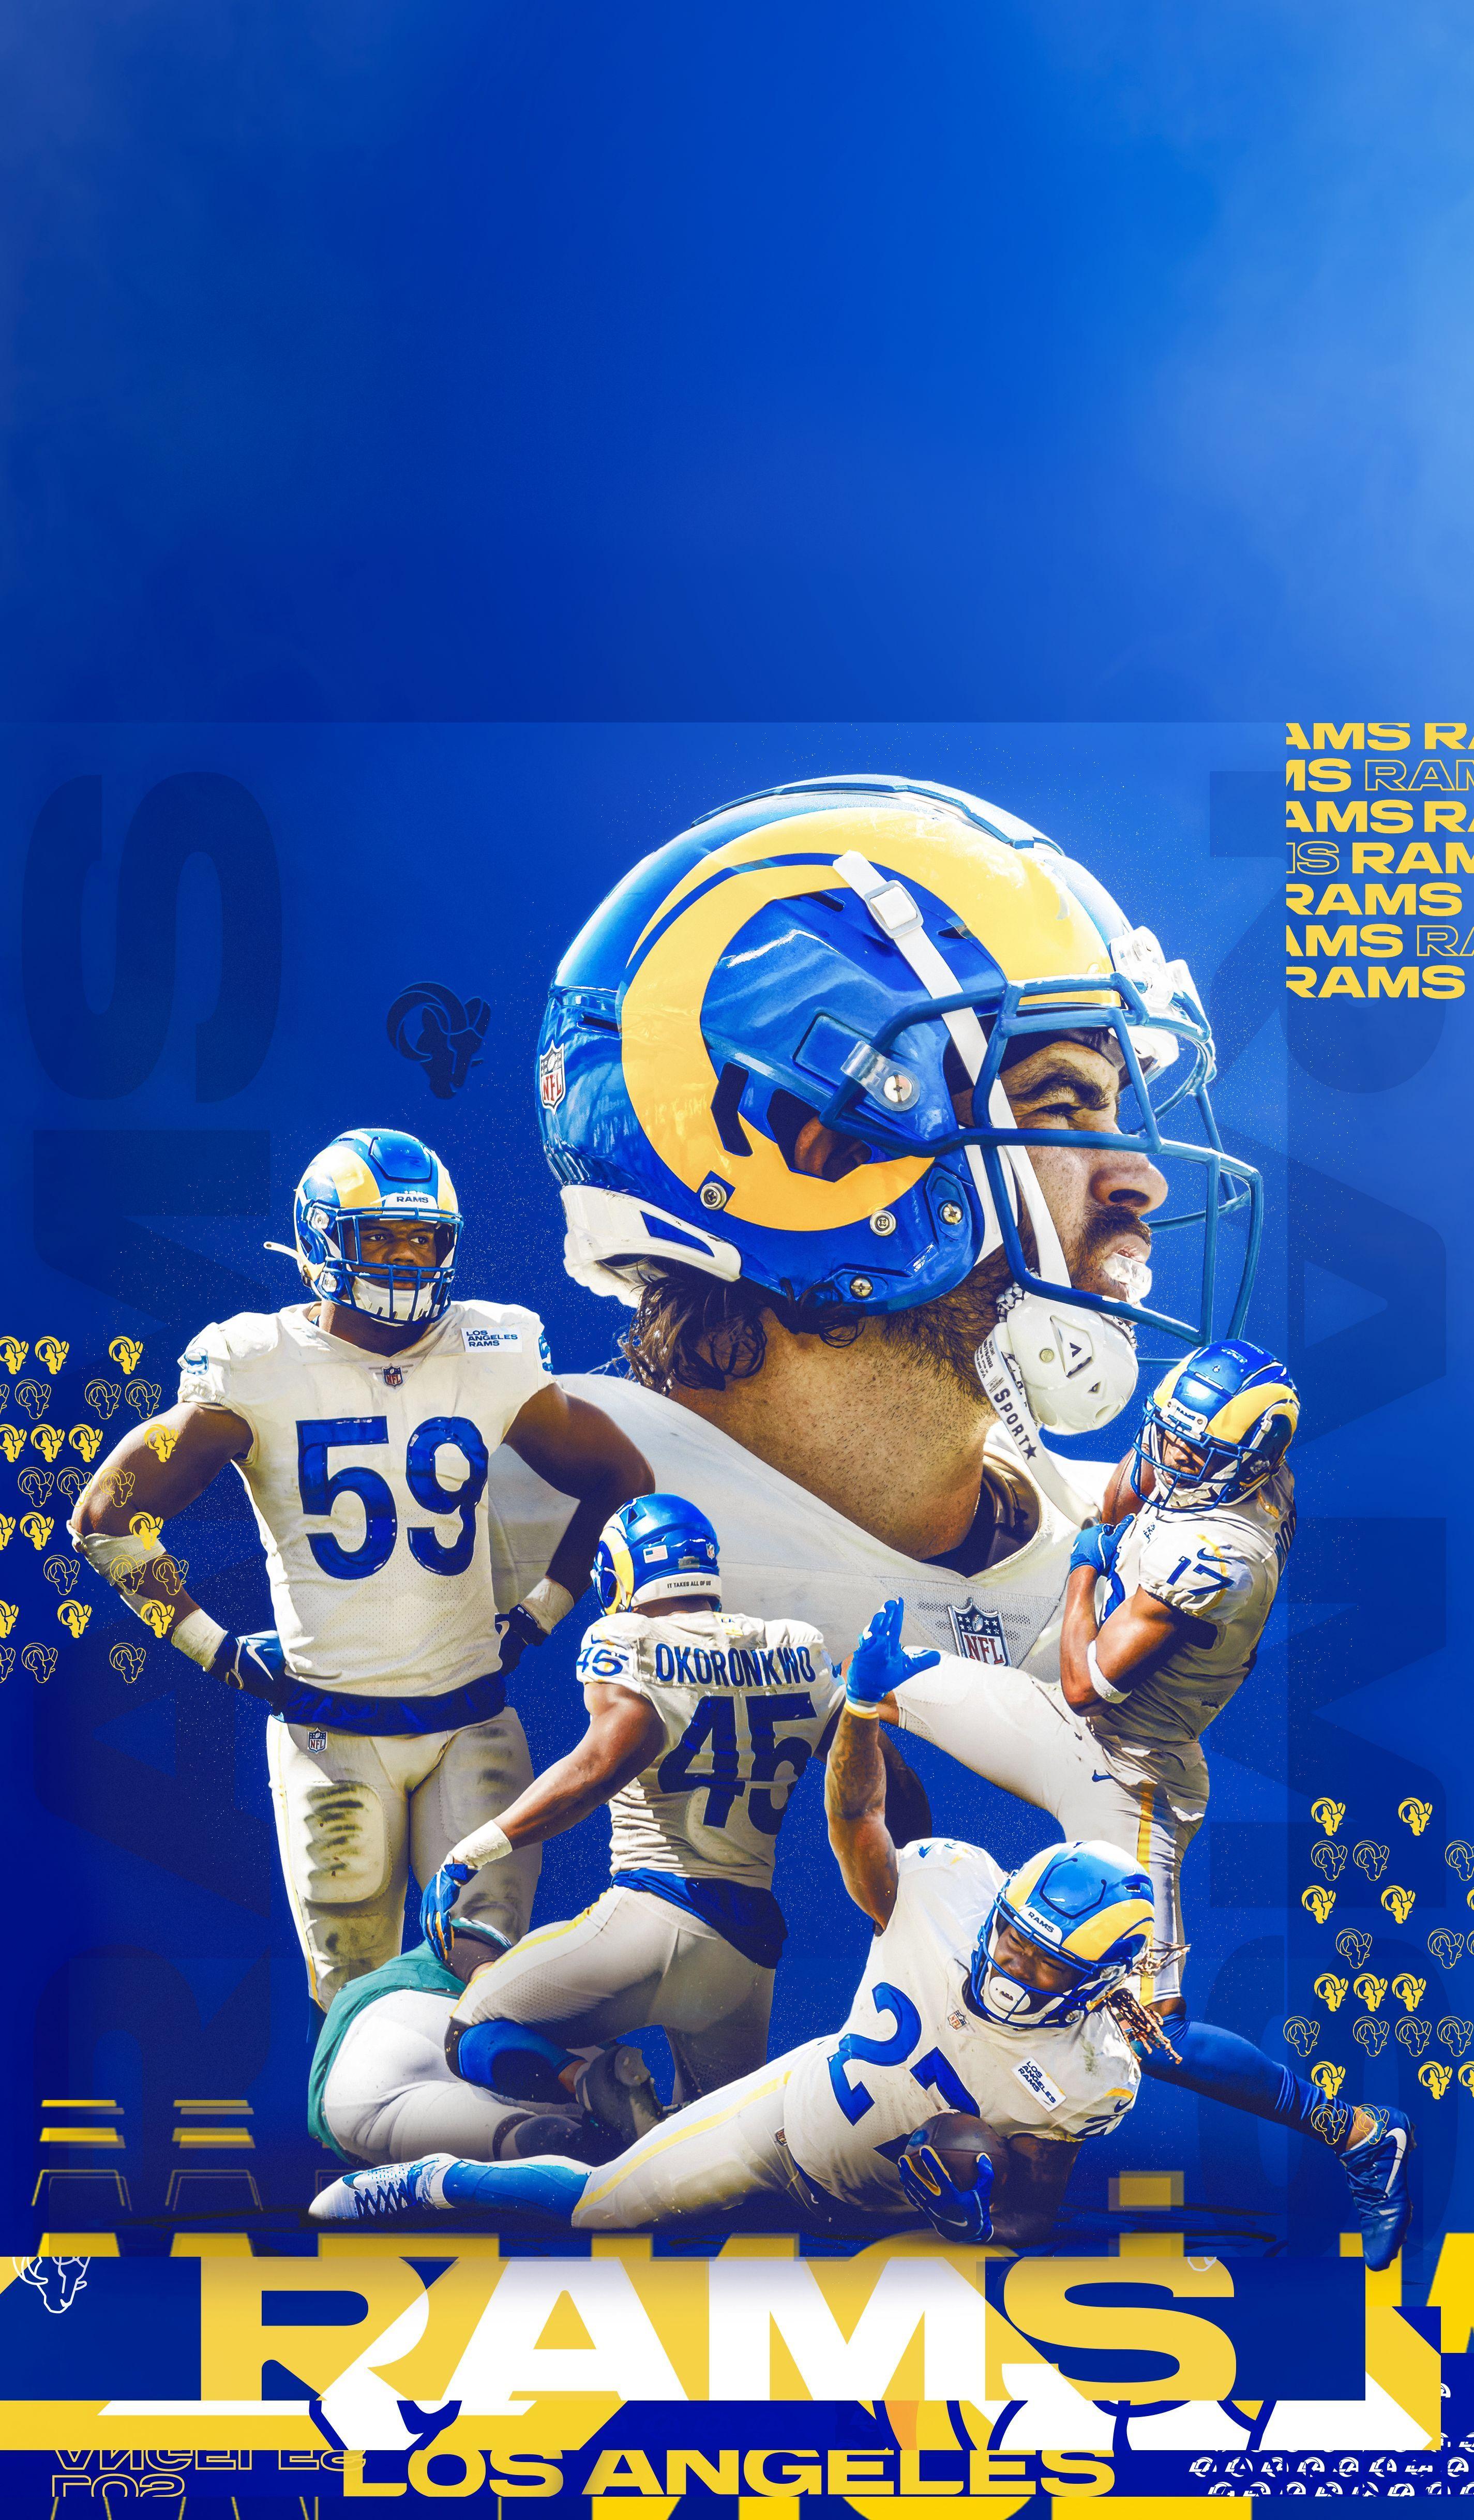 Cool Rams Wallpapers - Top Free Cool